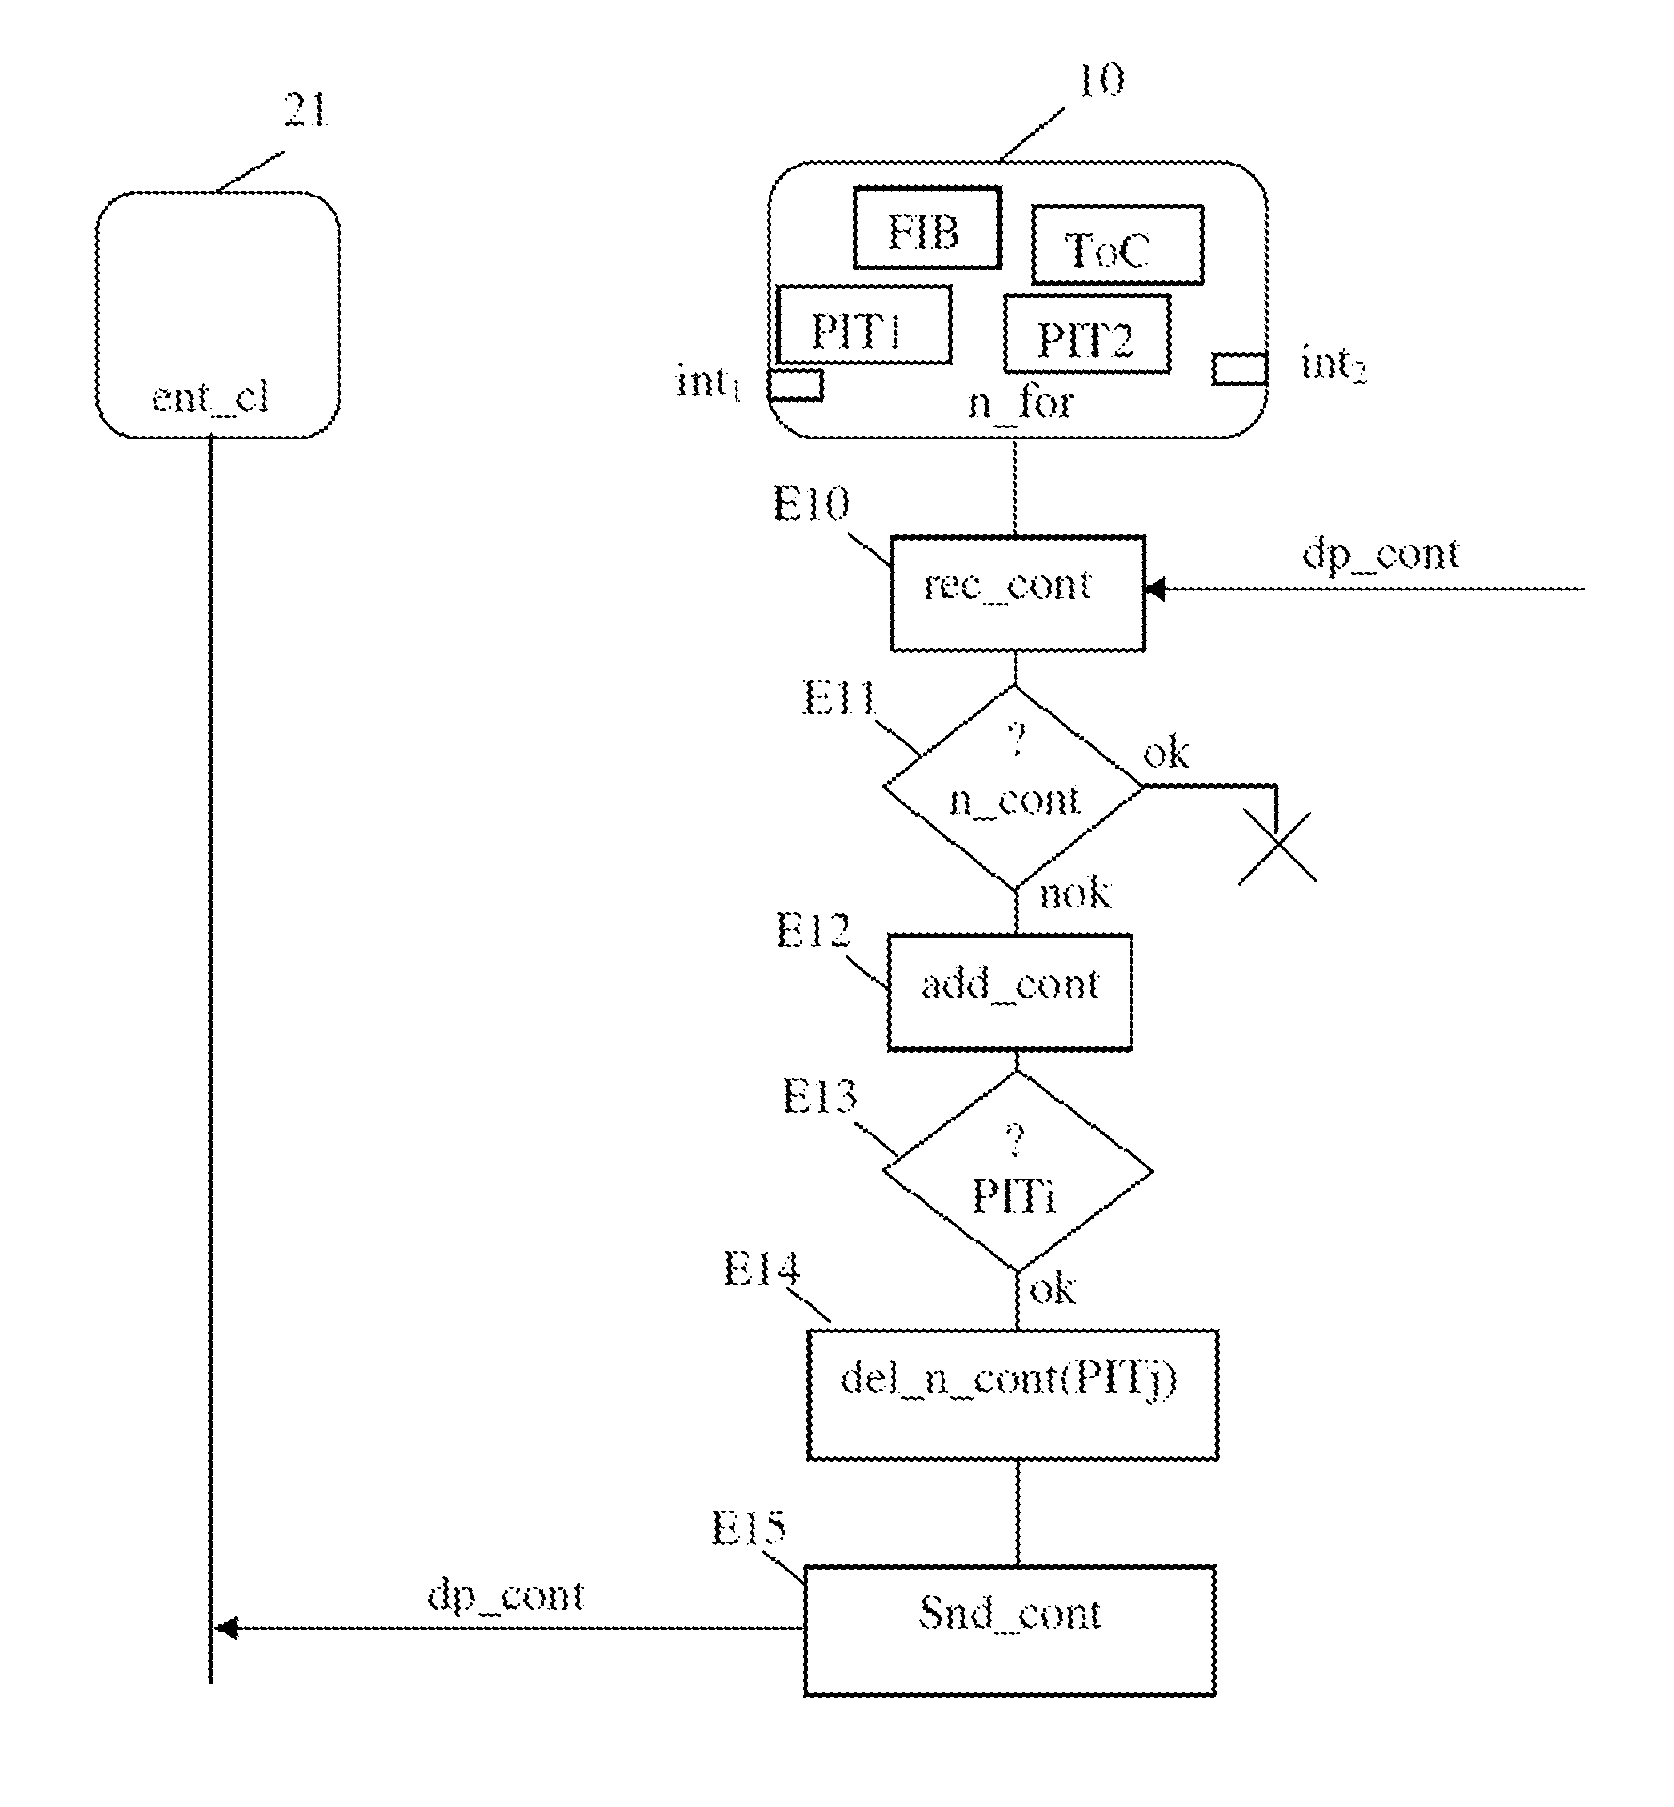 Method for Processing a Request in an Information-Centric Communication Network